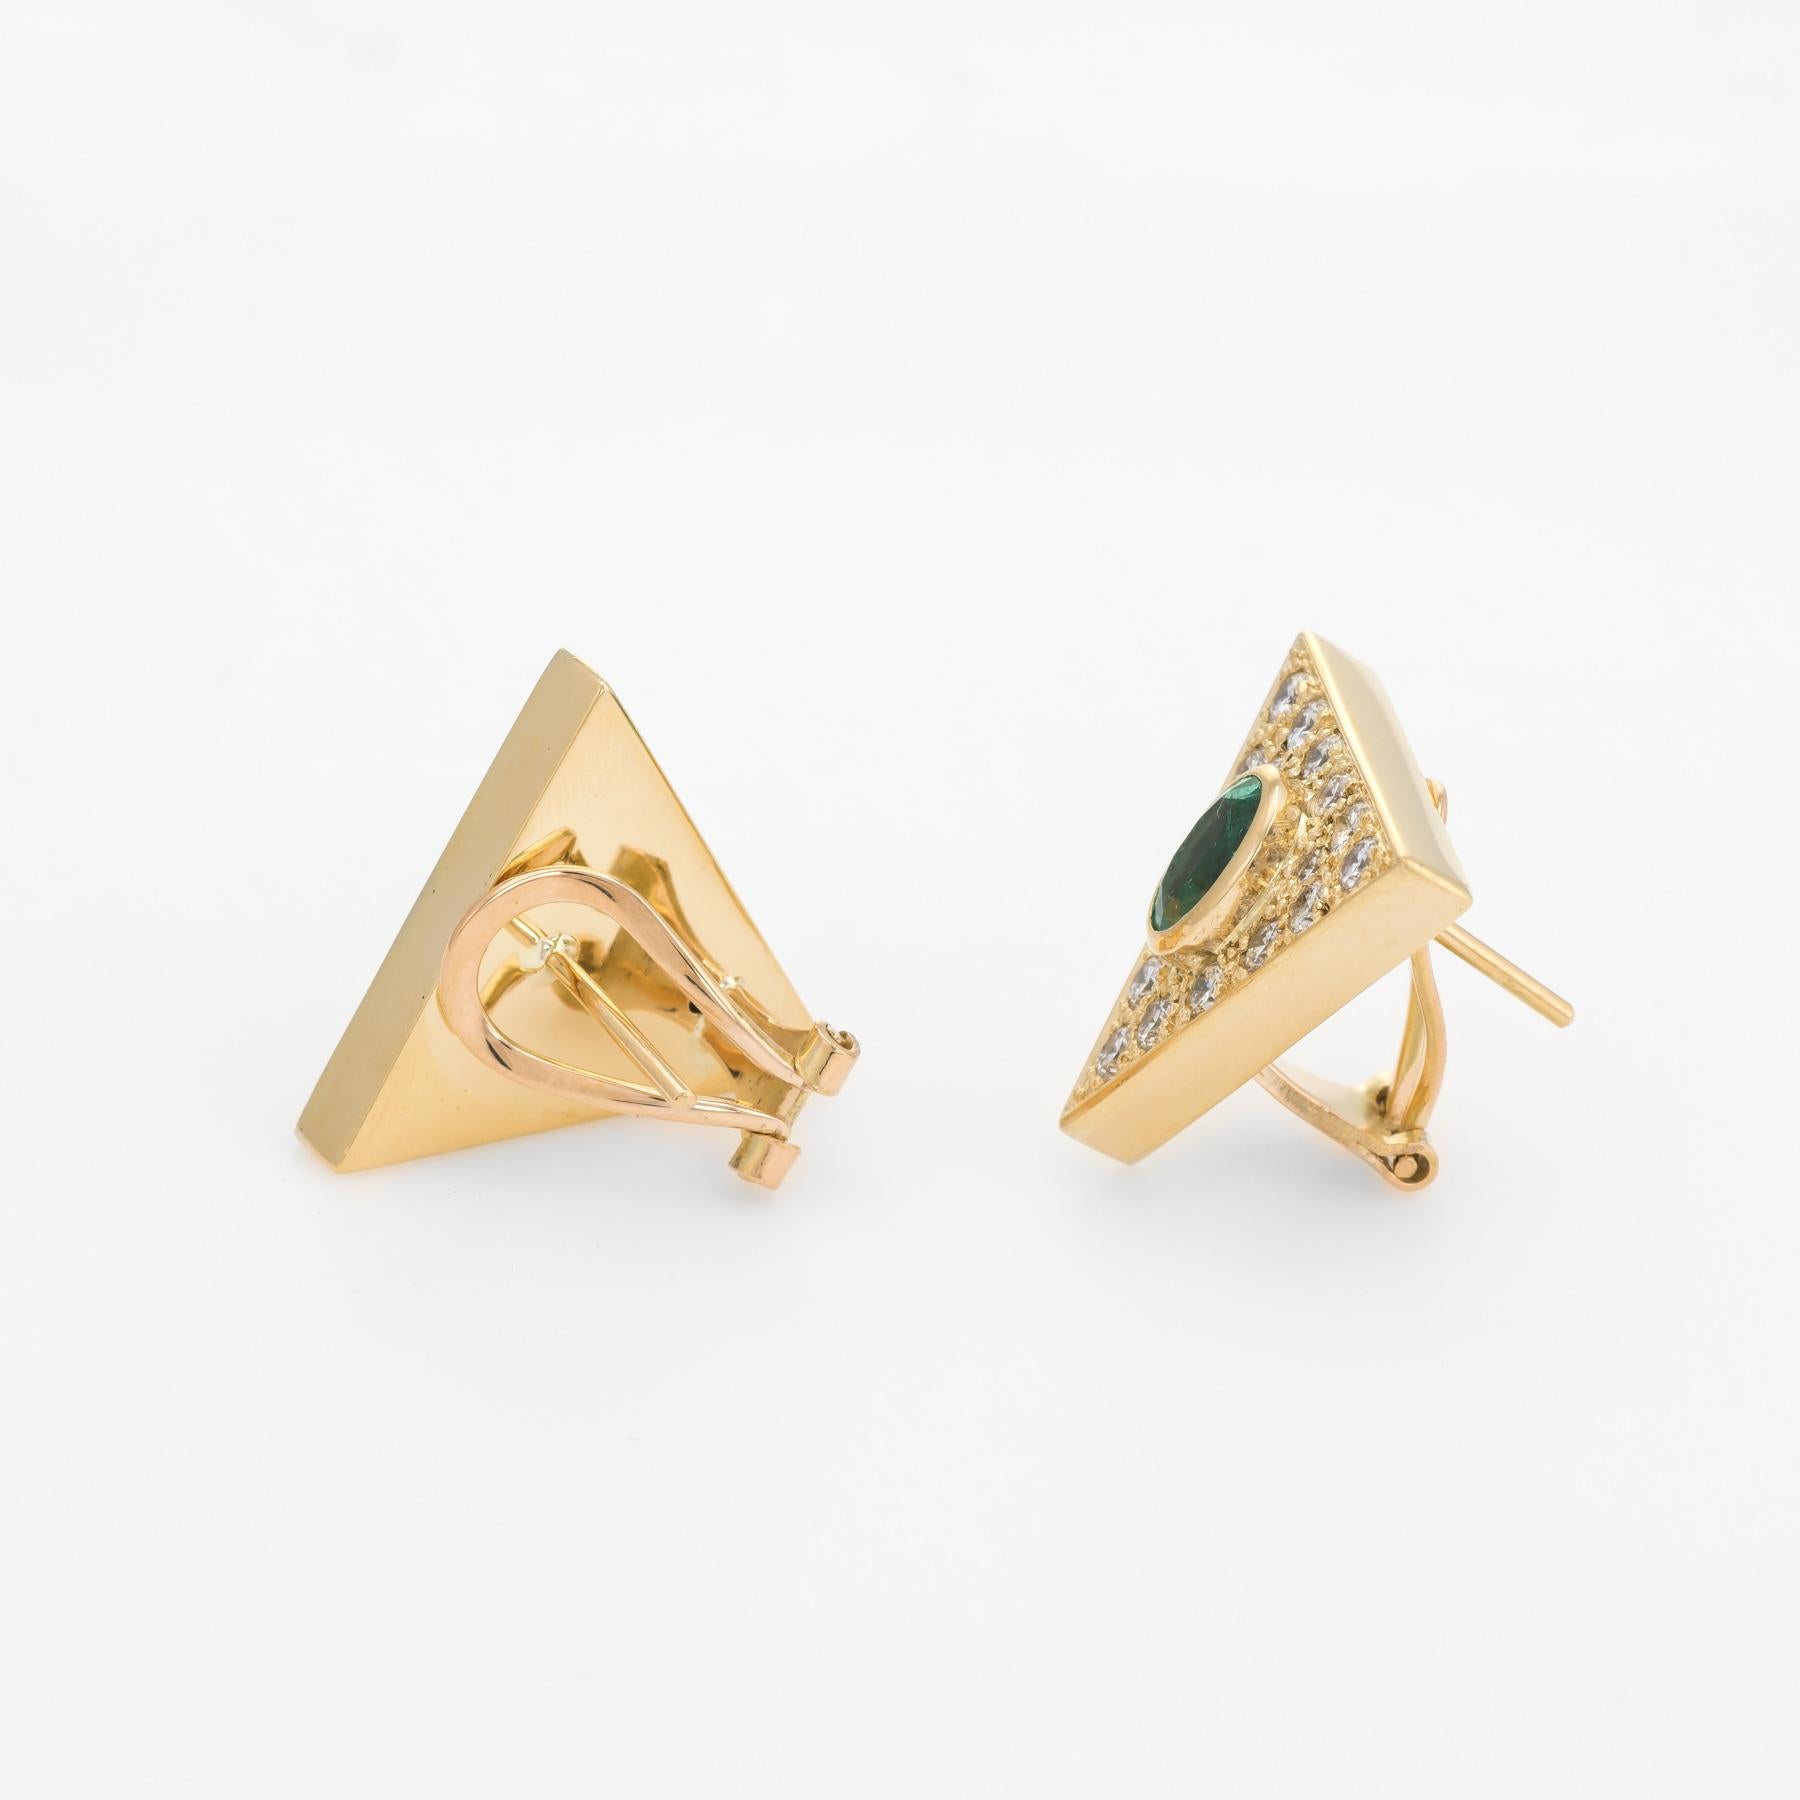 Stylish pair of vintage emerald & diamond earrings (circa 1970s to 1980s), crafted in 14k yellow gold. 

Two emeralds each measure 7mm x 5mm (estimated at 0.62 carats each - 1.25 carats total estimated weight), accented with 34 estimated 0.01 to